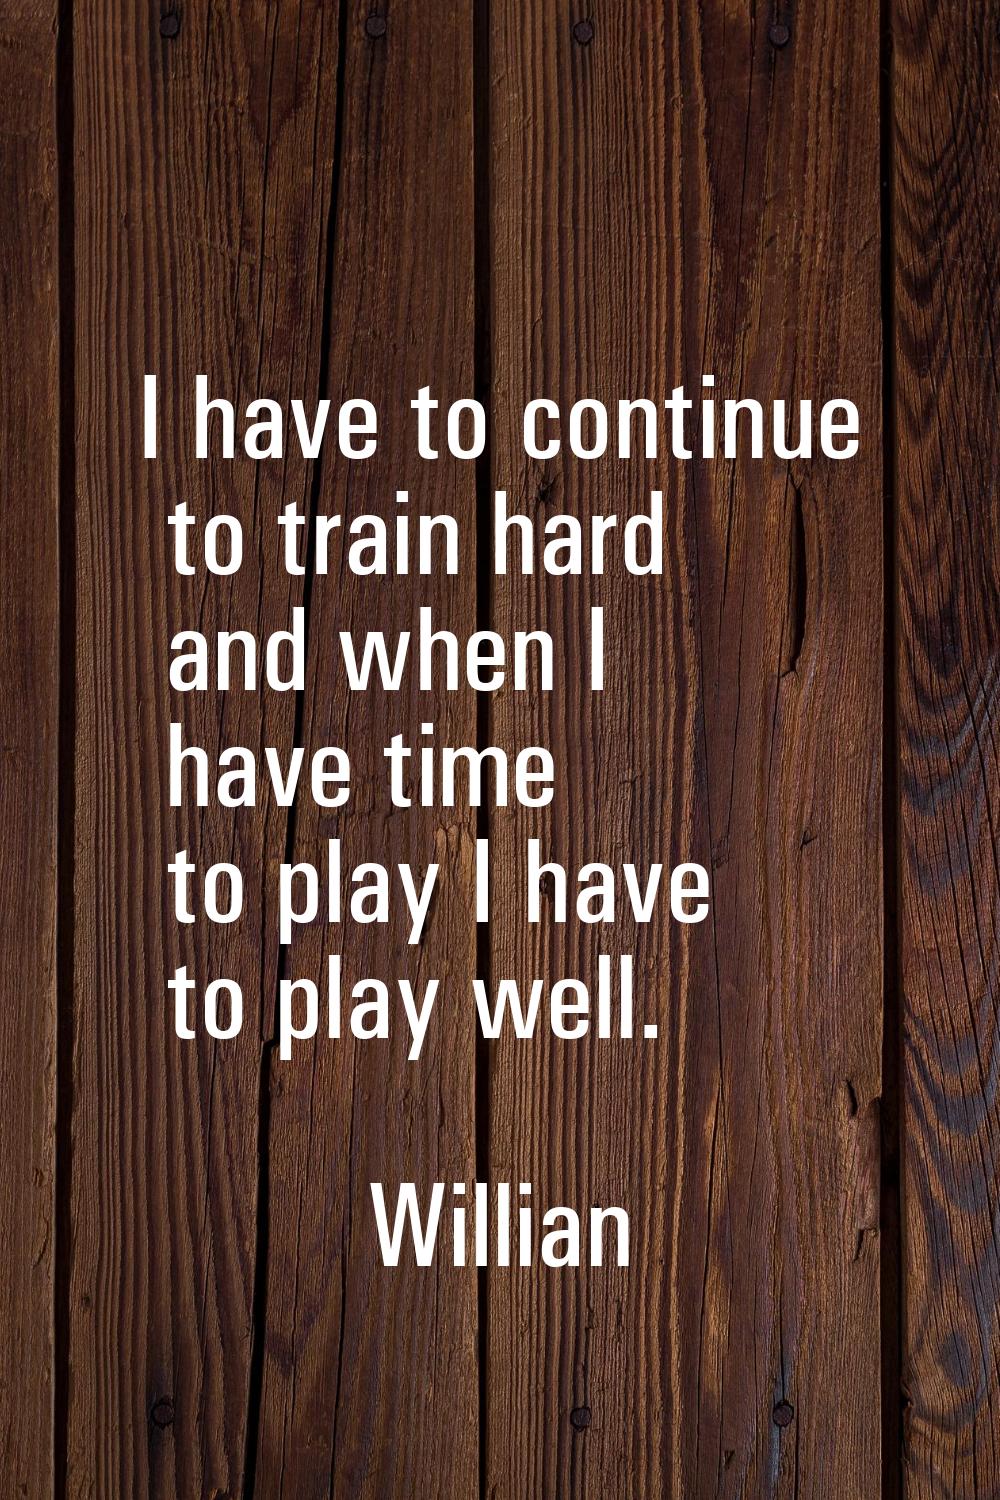 I have to continue to train hard and when I have time to play I have to play well.